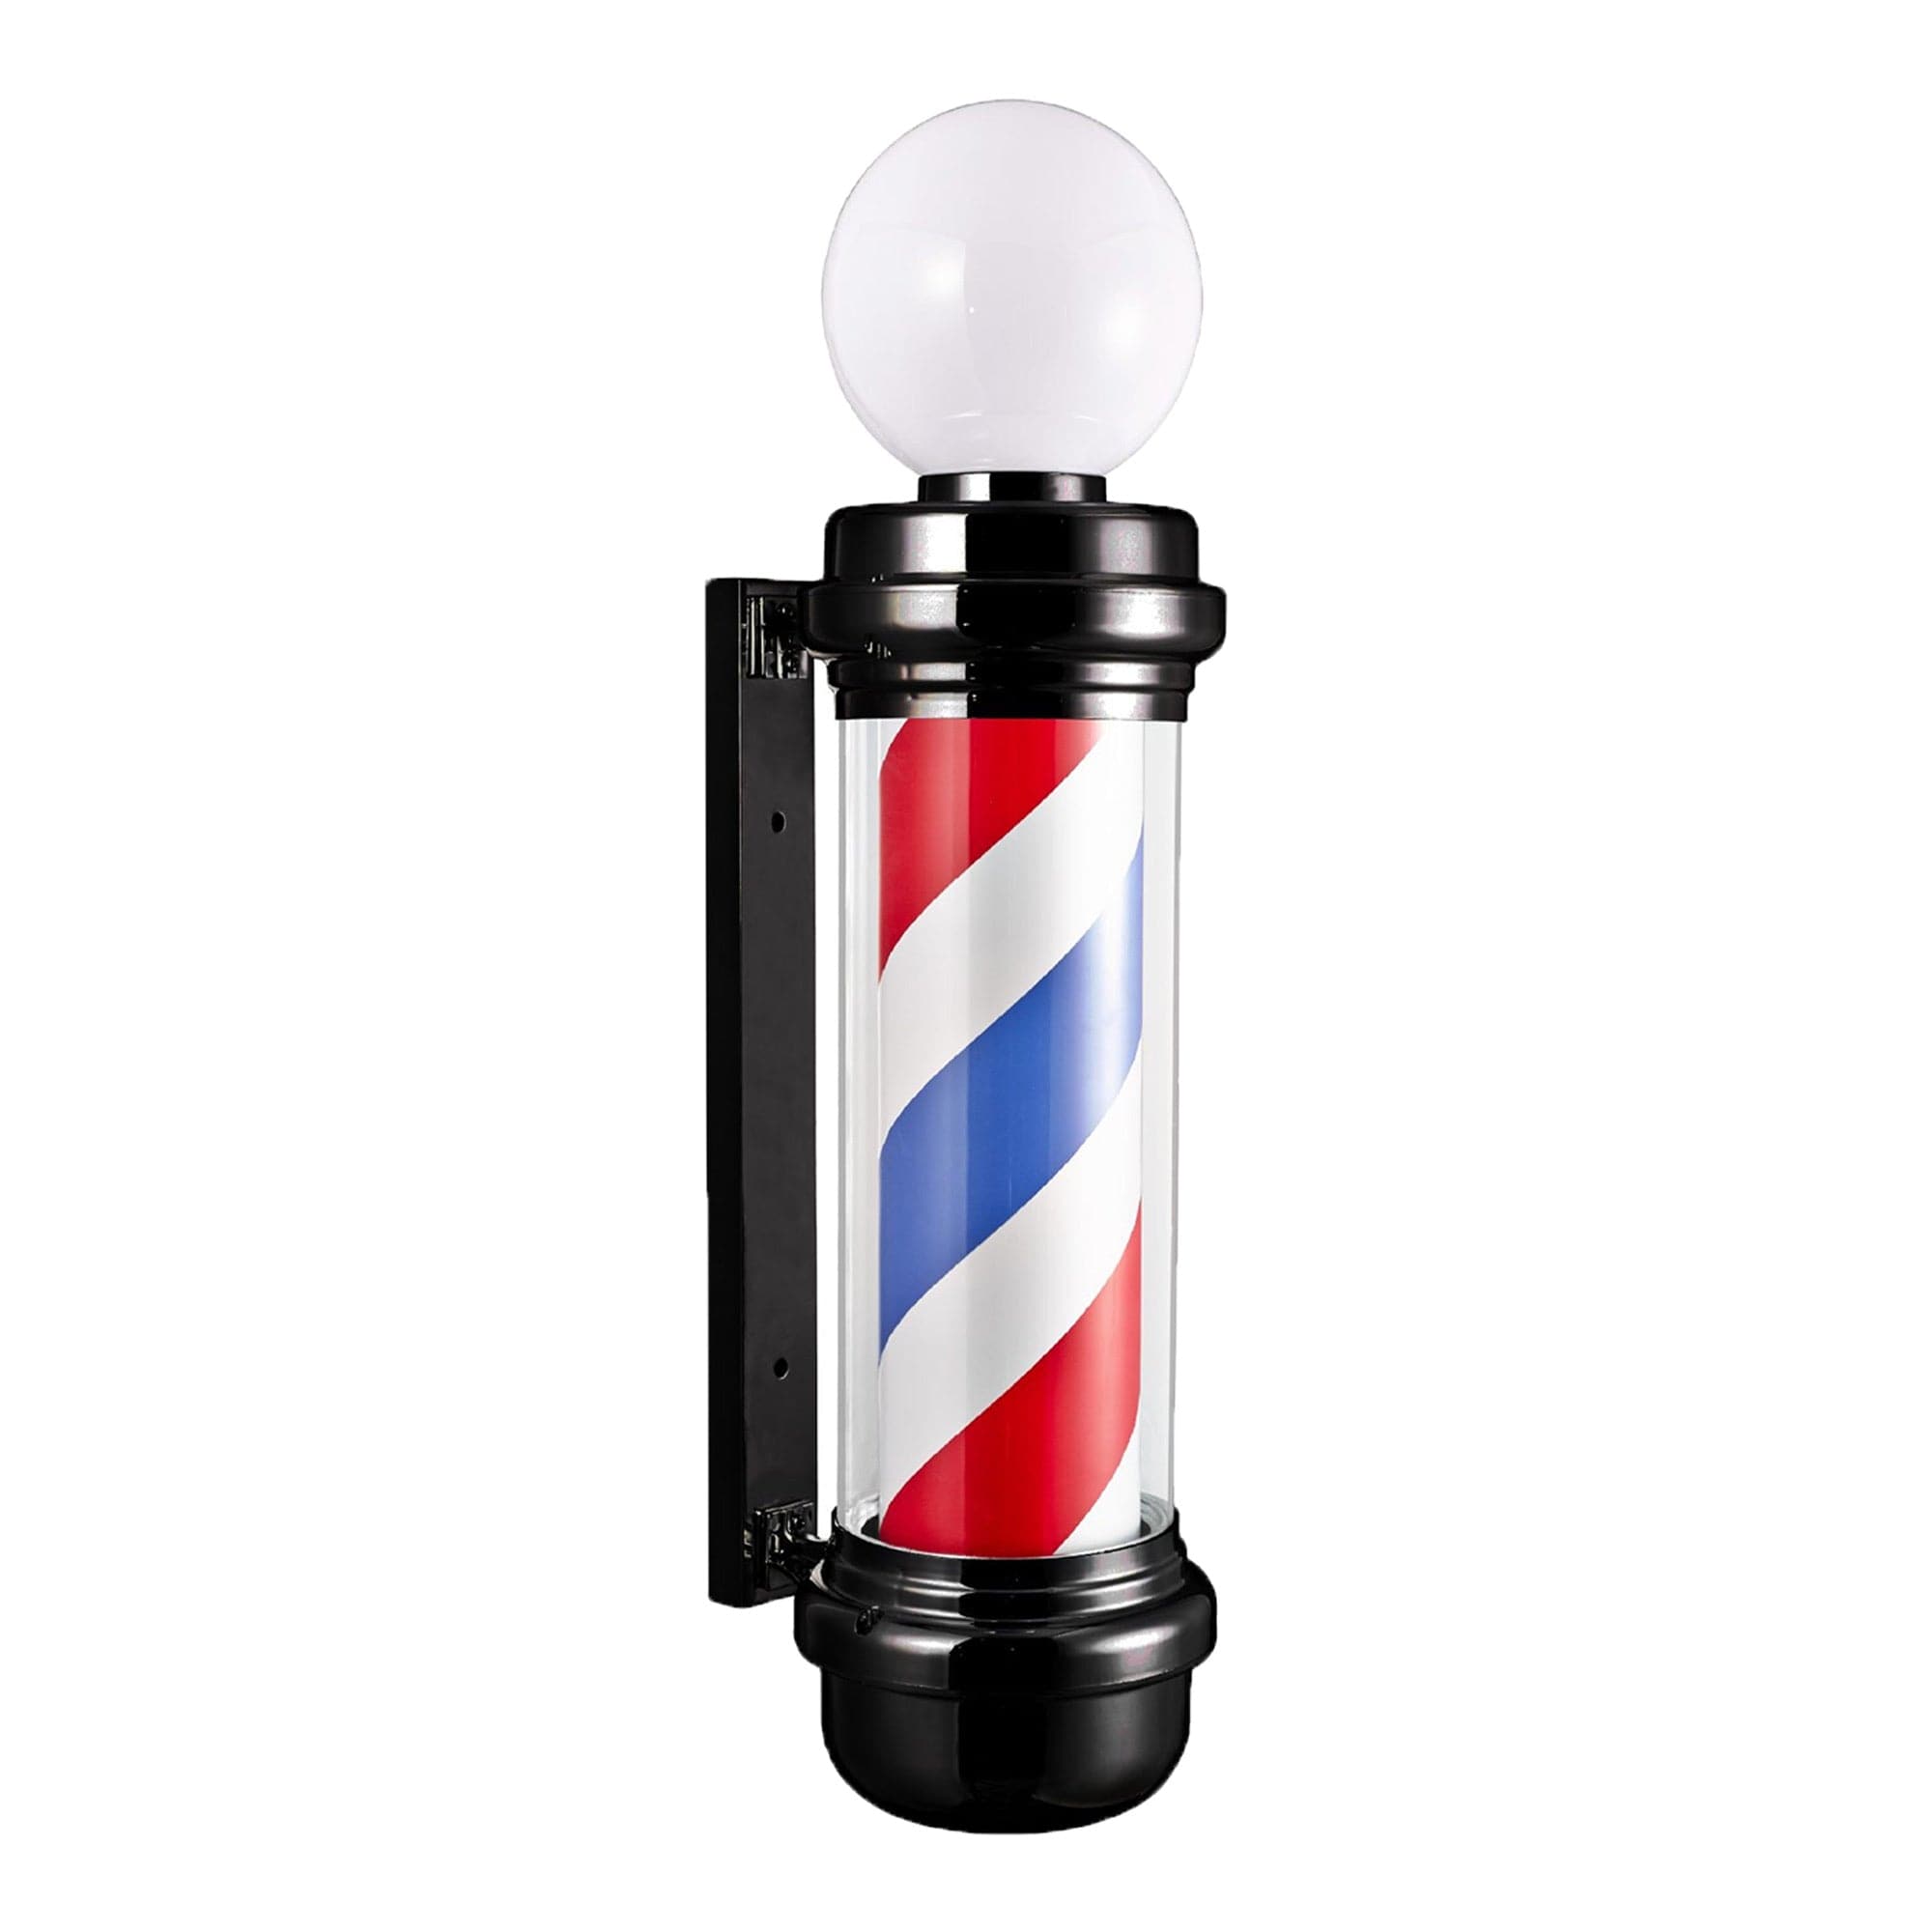 Gabri - Classic Barber Pole Light With Open Sign (Black Red White Blue Stripes) 85cm